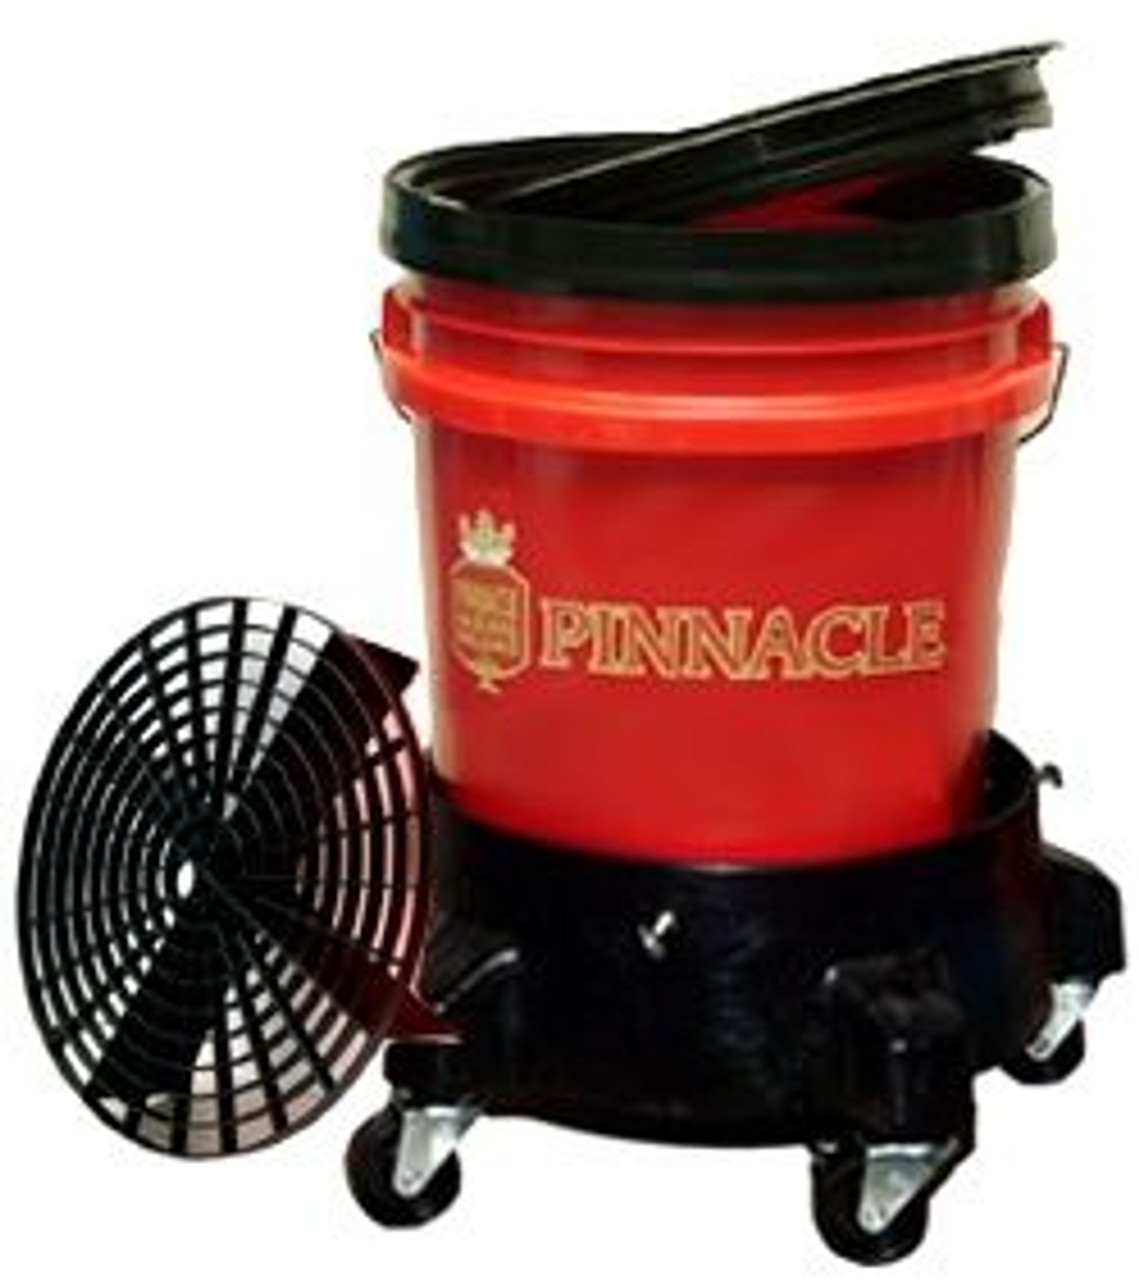 5 Gallon Wash Bucket System with Dolly - CLEAR